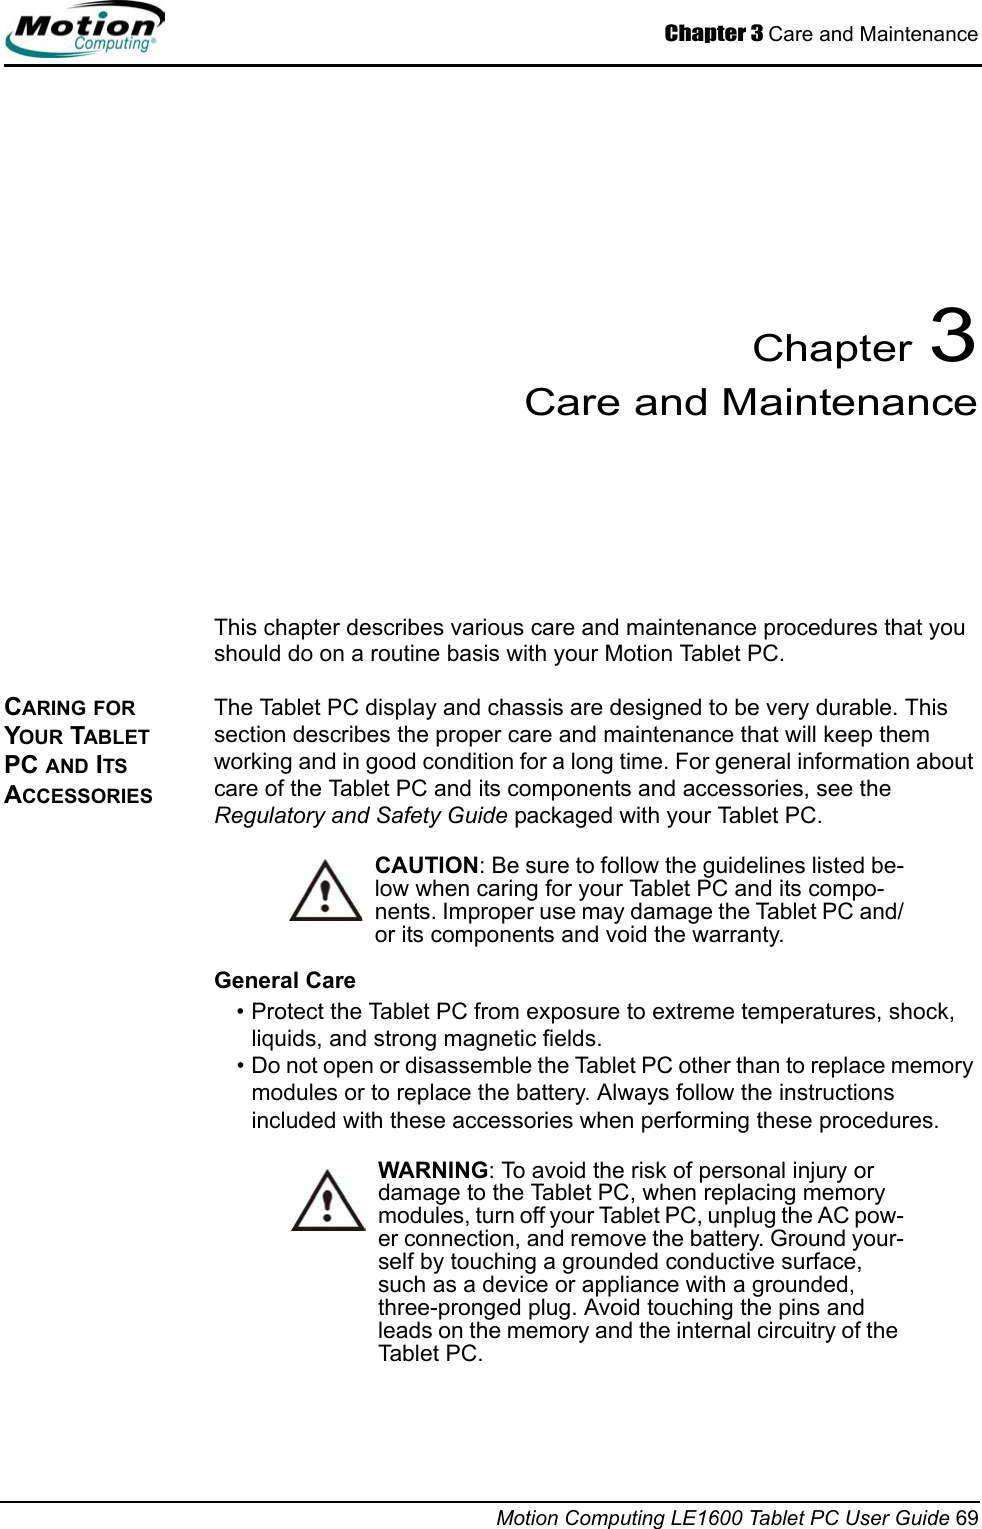 Chapter 3 Care and MaintenanceMotion Computing LE1600 Tablet PC User Guide 69Chapter 3Care and MaintenanceThis chapter describes various care and maintenance procedures that you should do on a routine basis with your Motion Tablet PC. CARING FOR YOUR TABLET PC AND ITS ACCESSORIESThe Tablet PC display and chassis are designed to be very durable. This section describes the proper care and maintenance that will keep them working and in good condition for a long time. For general information about care of the Tablet PC and its components and accessories, see the Regulatory and Safety Guide packaged with your Tablet PC.CAUTION: Be sure to follow the guidelines listed be-low when caring for your Tablet PC and its compo-nents. Improper use may damage the Tablet PC and/or its components and void the warranty. General Care• Protect the Tablet PC from exposure to extreme temperatures, shock, liquids, and strong magnetic fields.• Do not open or disassemble the Tablet PC other than to replace memory modules or to replace the battery. Always follow the instructions included with these accessories when performing these procedures.WARNING: To avoid the risk of personal injury or damage to the Tablet PC, when replacing memory modules, turn off your Tablet PC, unplug the AC pow-er connection, and remove the battery. Ground your-self by touching a grounded conductive surface, such as a device or appliance with a grounded, three-pronged plug. Avoid touching the pins and leads on the memory and the internal circuitry of the Tablet PC. 